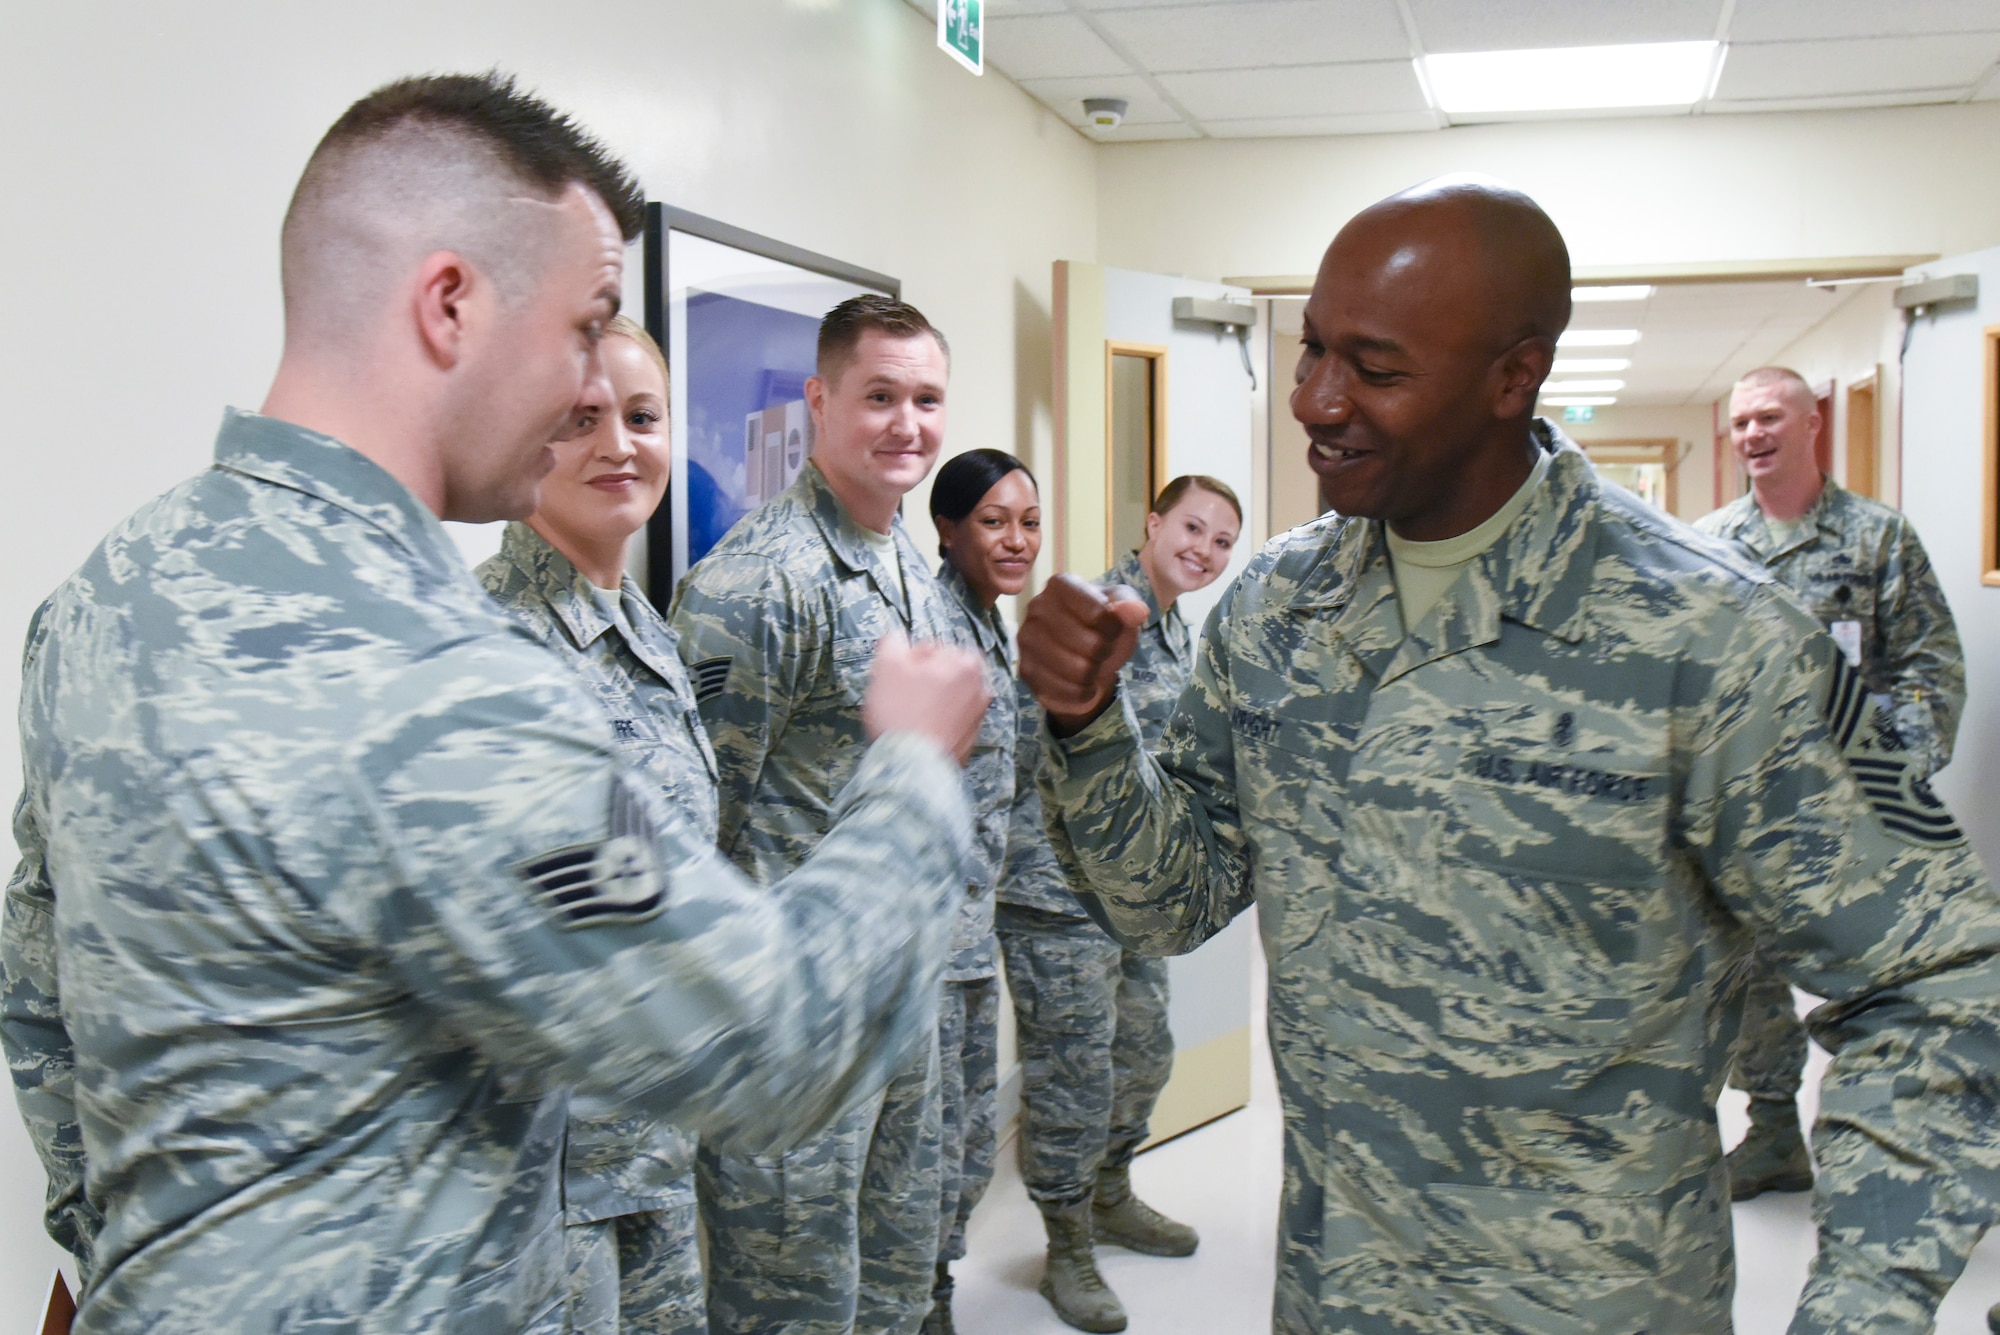 Chief Master Sgt. of the Air Force Kaleth O. Wright greets Airmen assigned to the 48th Medical Group during an immersion tour of Royal Air Force Lakenheath, England, Aug. 1, 2018. During his visit, Wright met with 48th Fighter Wing Airmen to answer questions and see how they take care of the mission. (U.S. Air Force photo by Airman 1st Class Christopher Sparks)